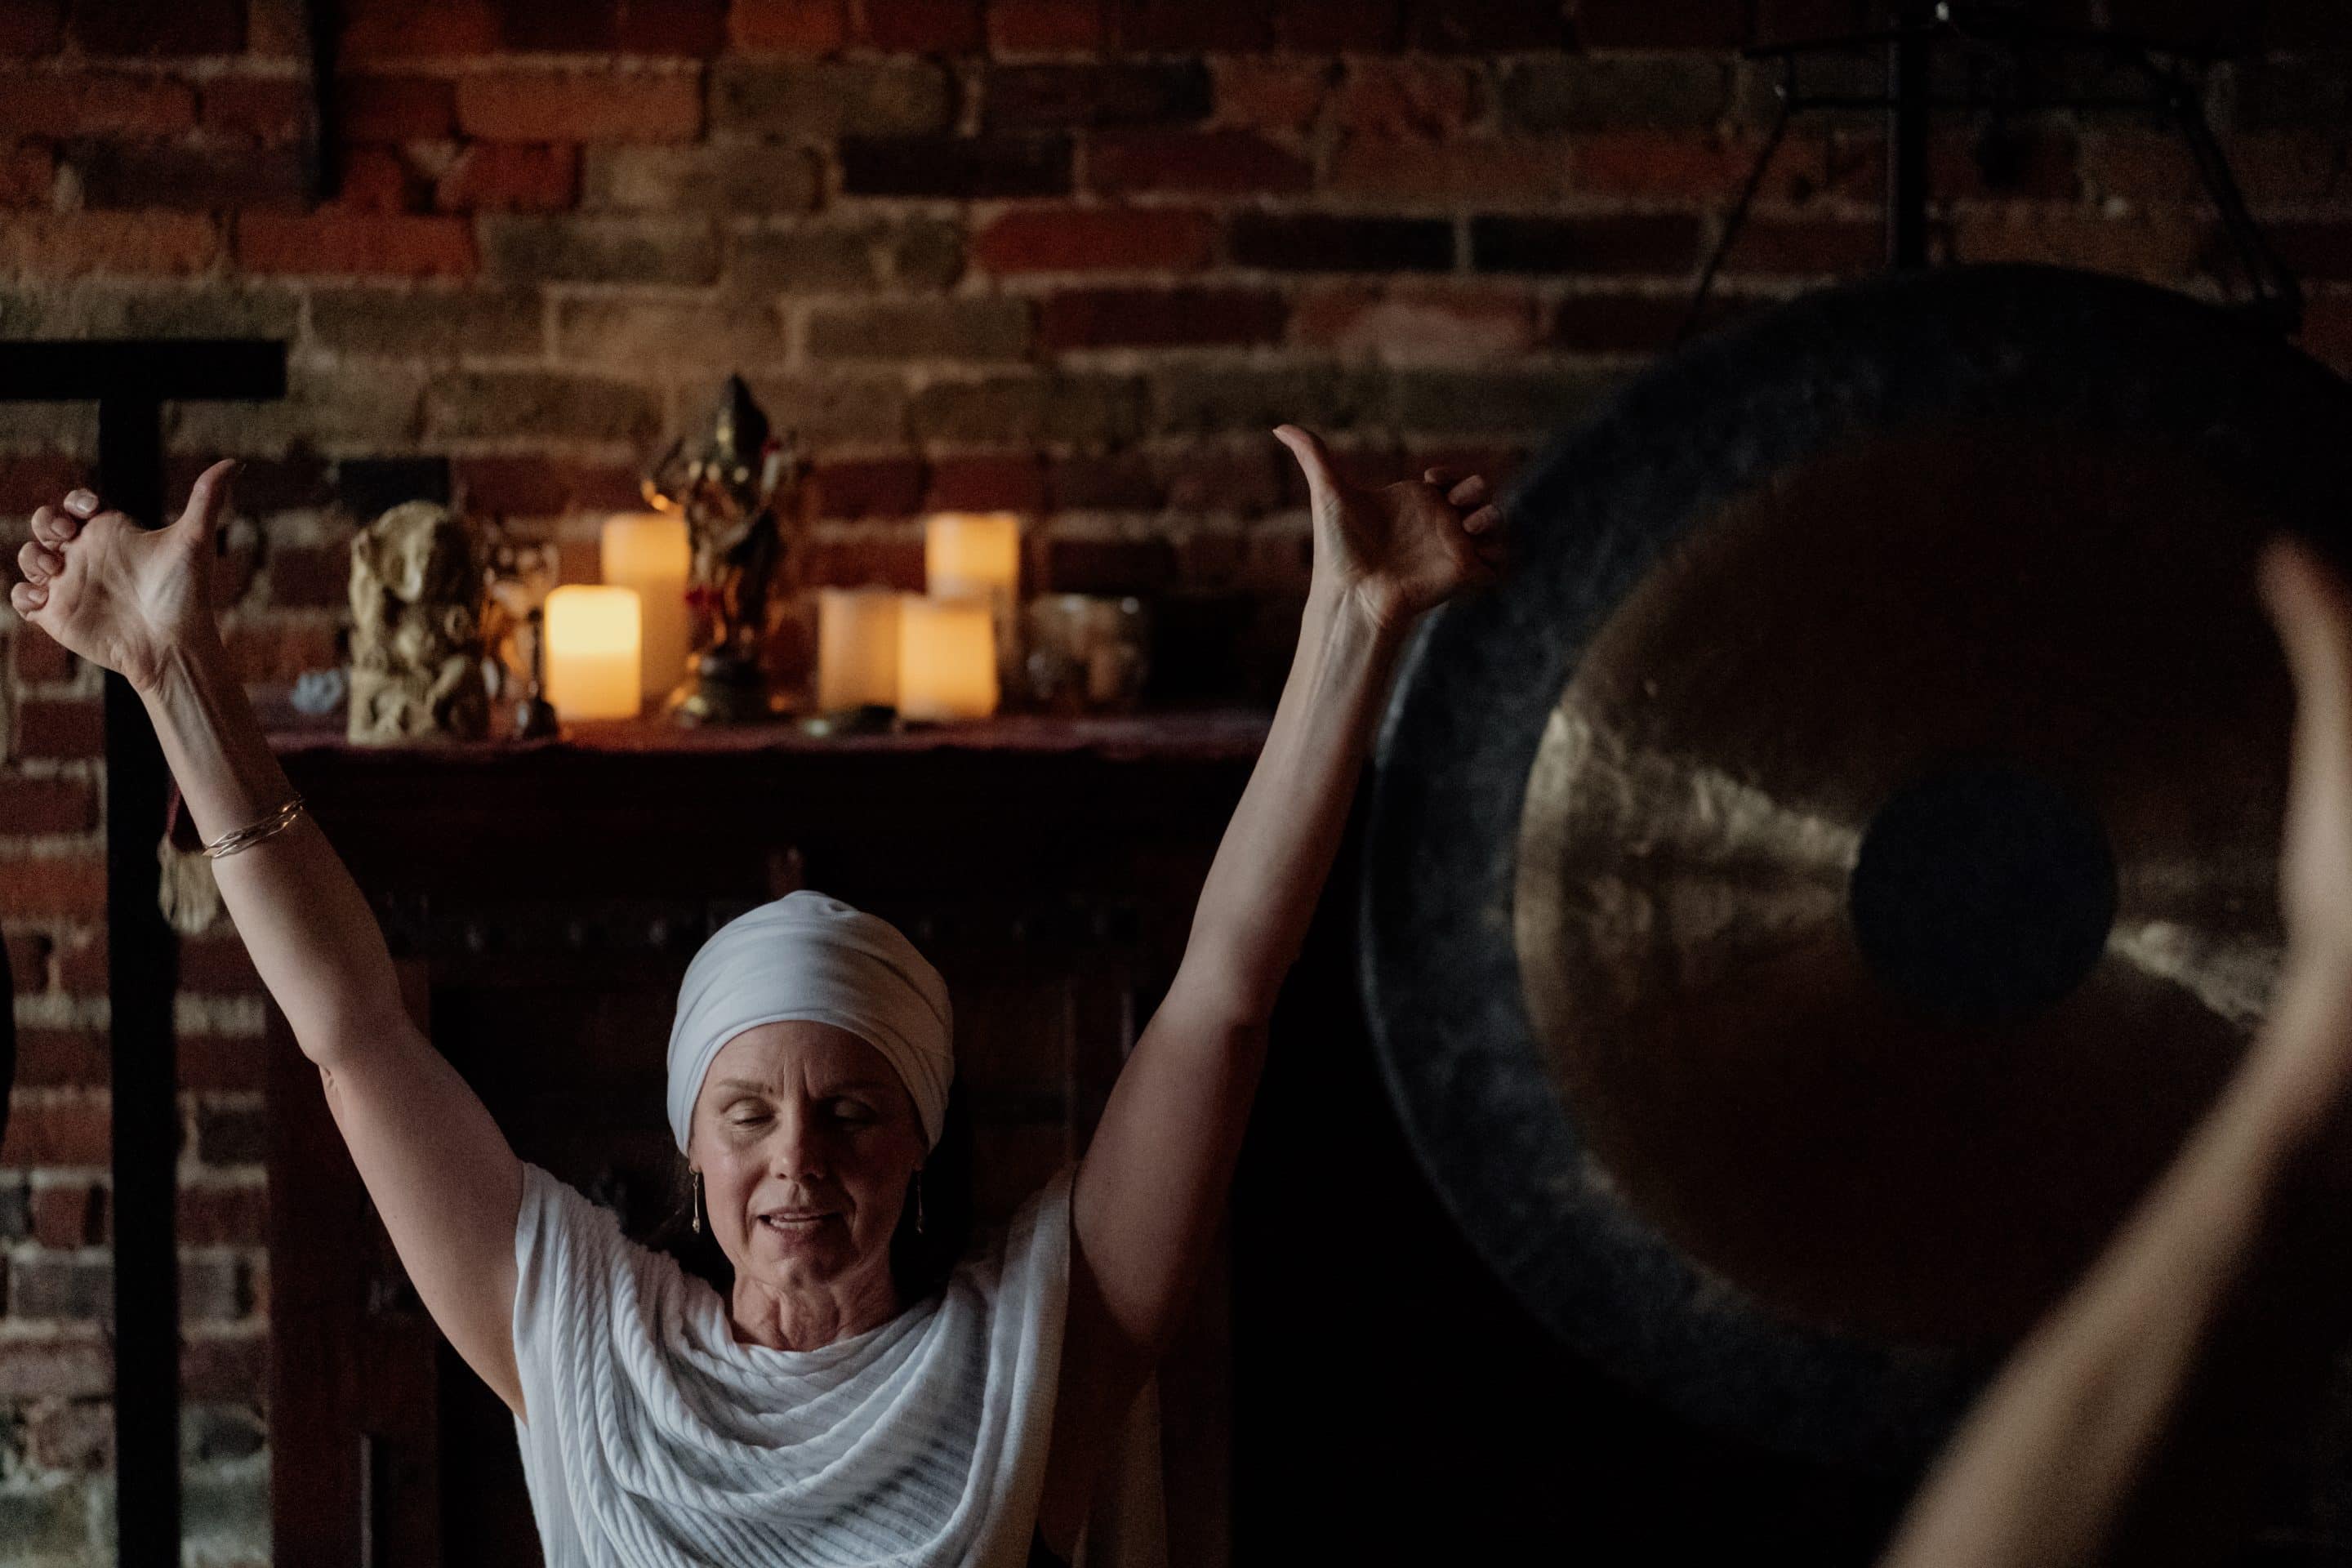 A woman wearing a turban practices yoga in a brick-walled room near a large gong.